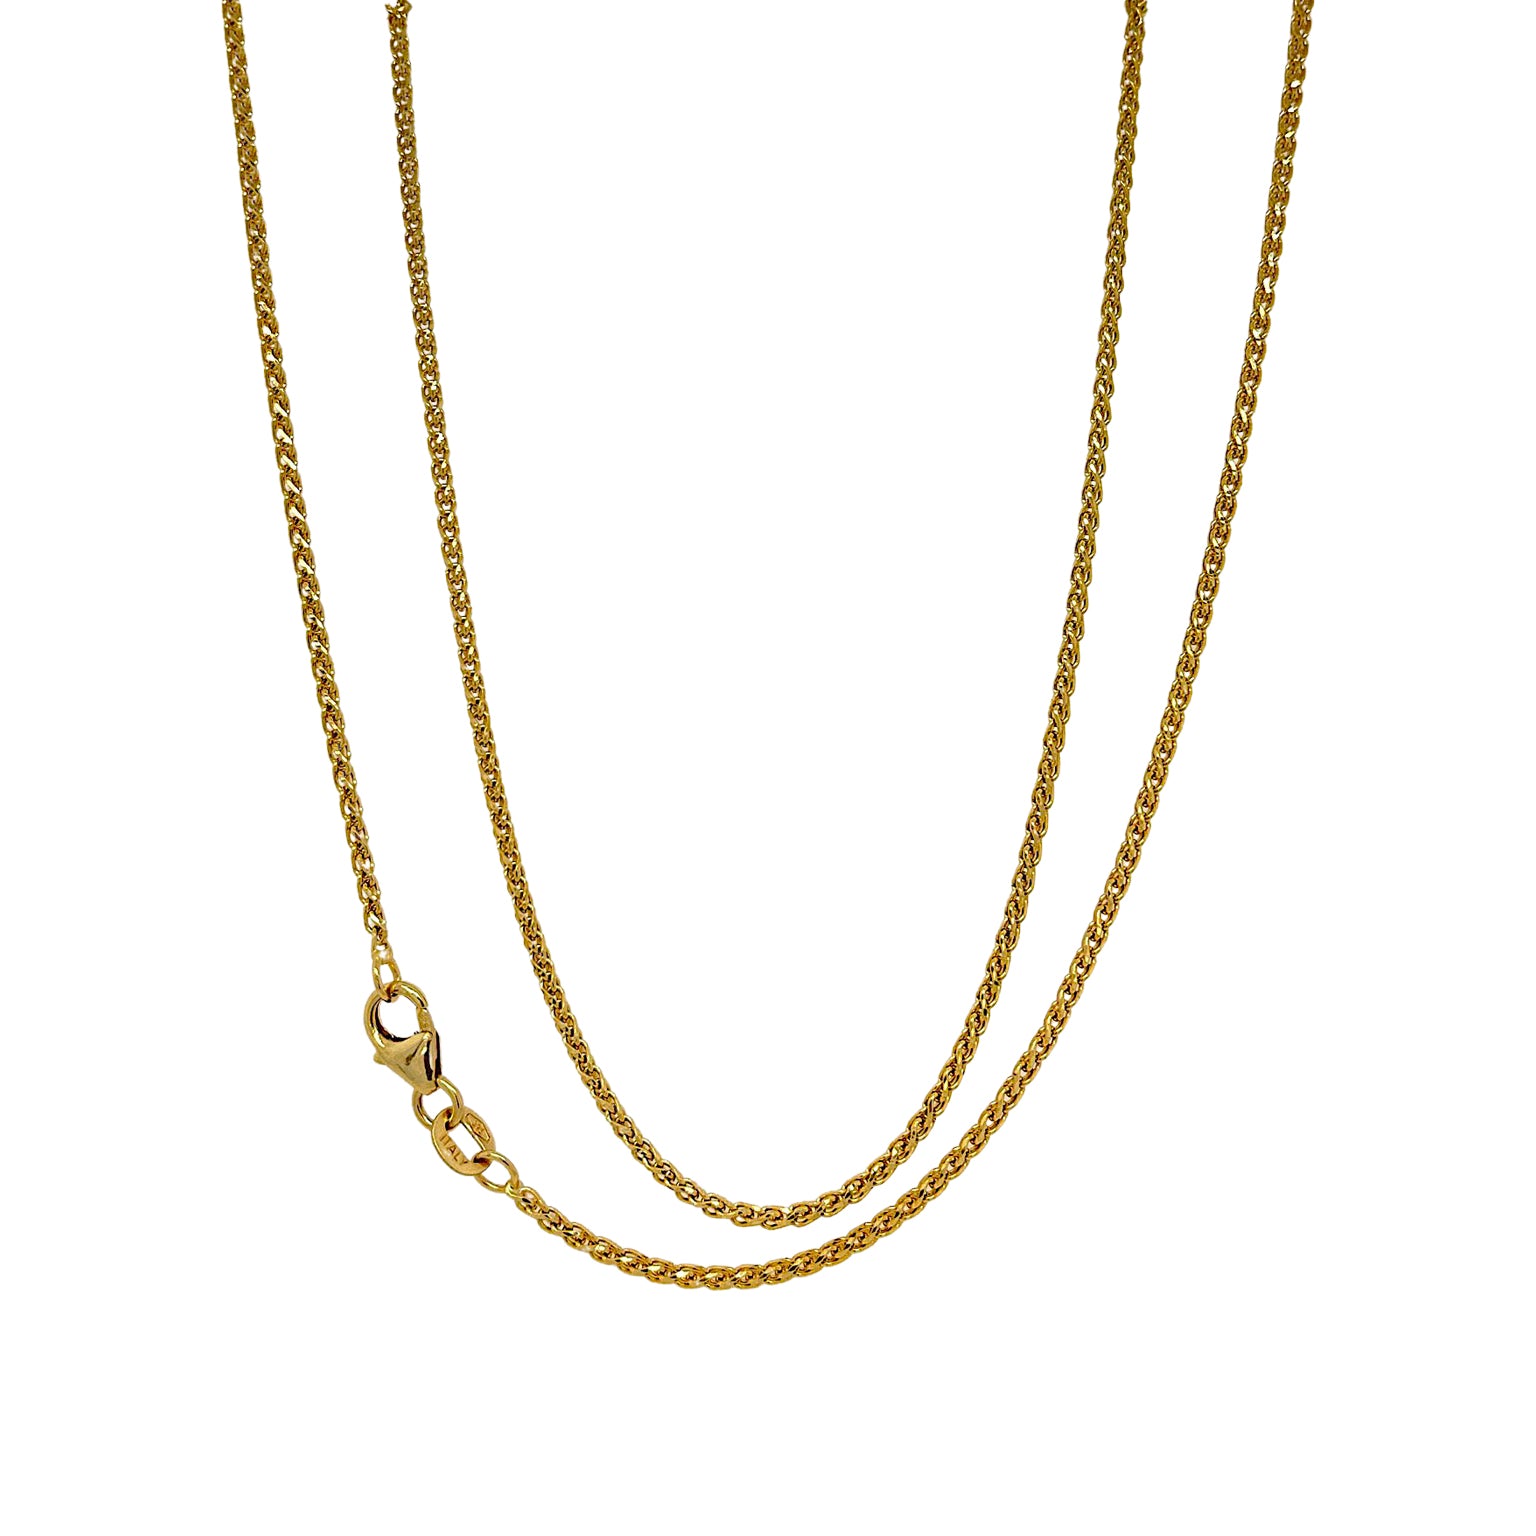 Buy 24K Gold Foxtail Chains 4x2mmchain for Necklace Online in India - Etsy